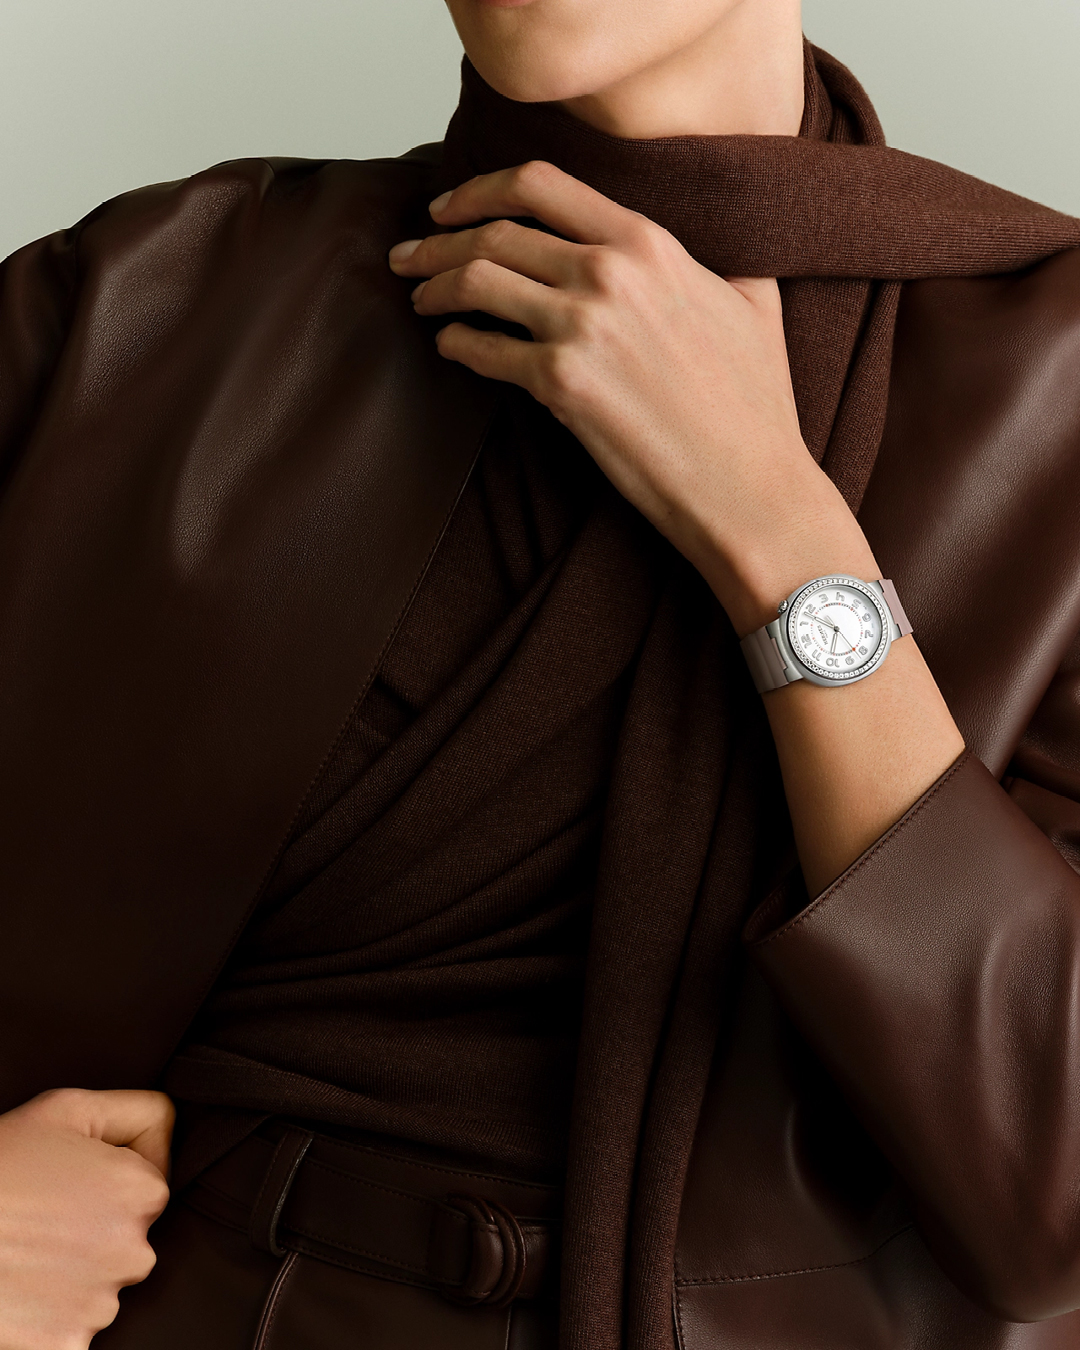 Hermès Challenges Rolex and Chanel with New 'Cut' Sports Watch for Women